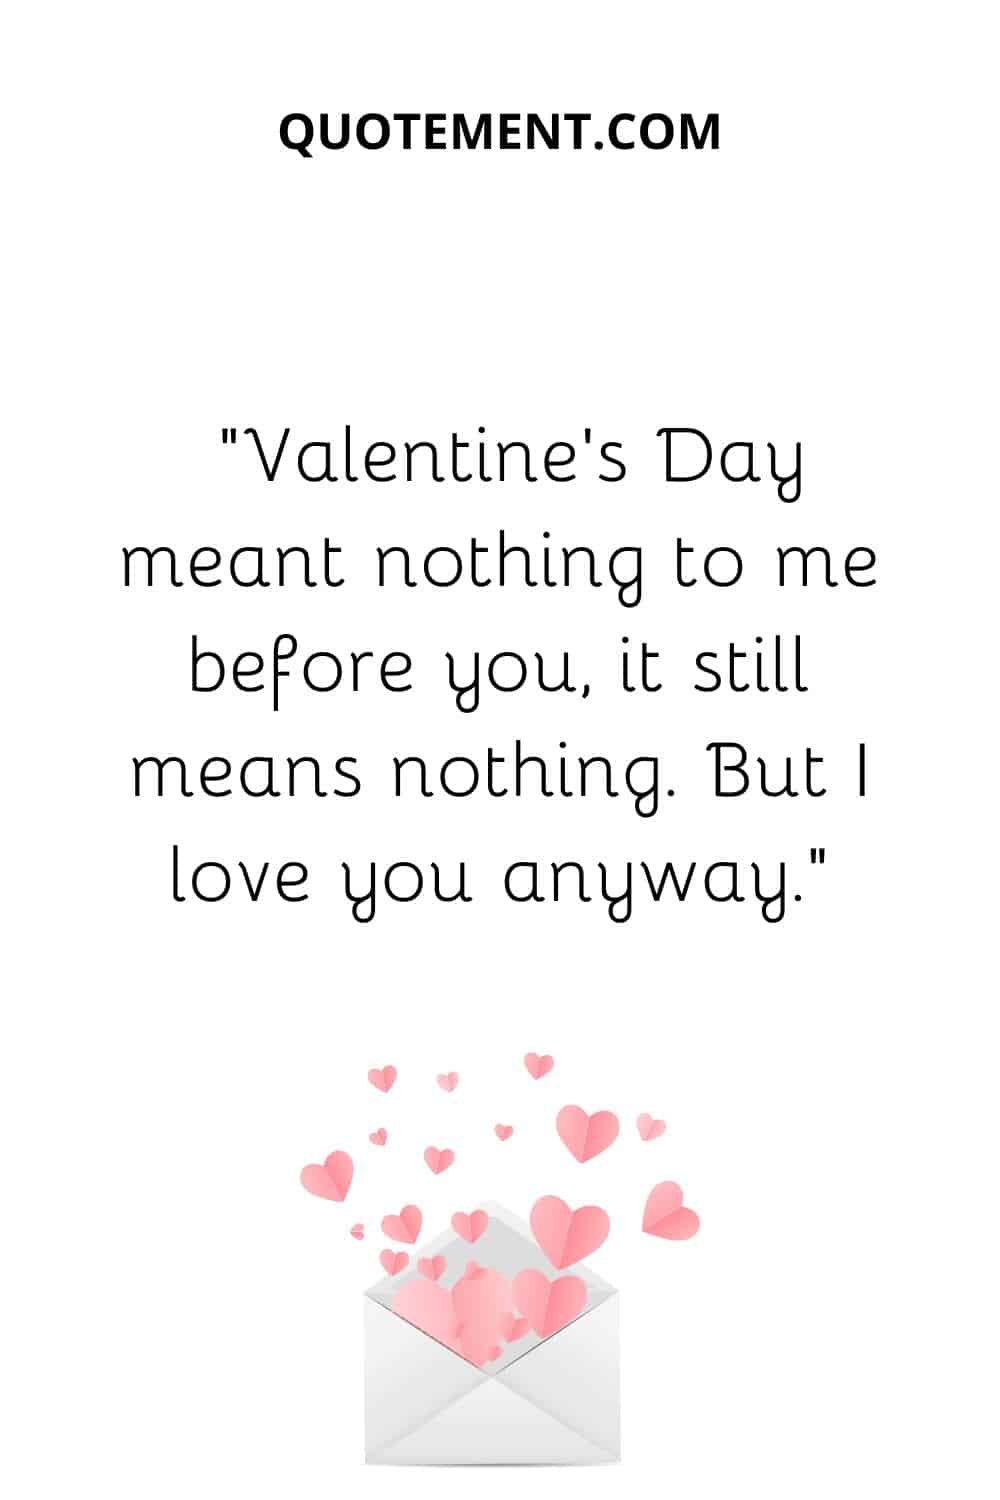 “Valentine’s Day meant nothing to me before you, it still means nothing. But I love you anyway.”